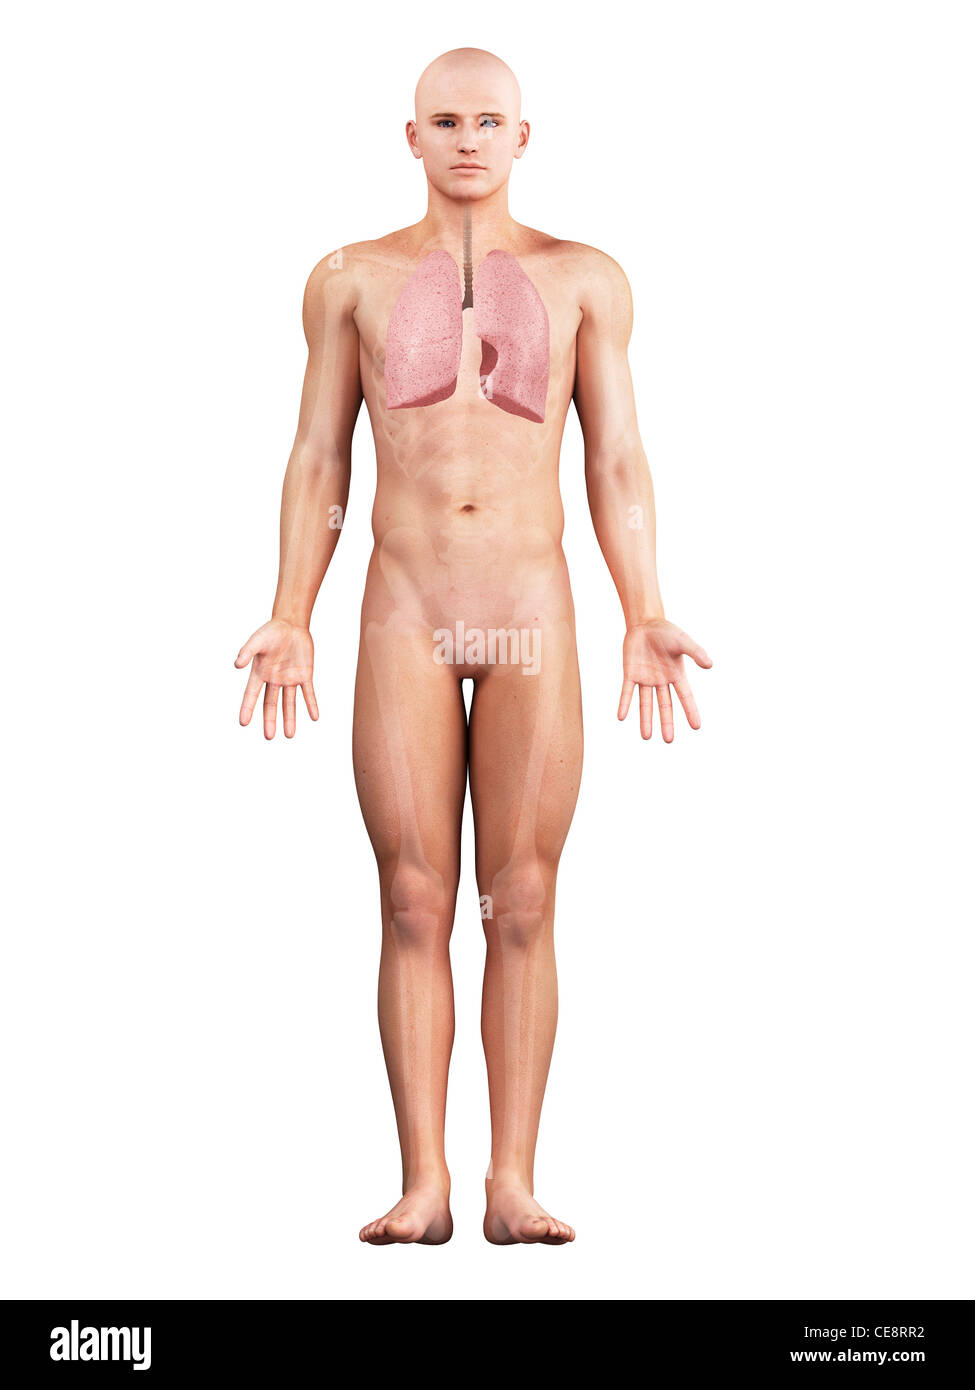 Healthy lungs, computer artwork. Stock Photo